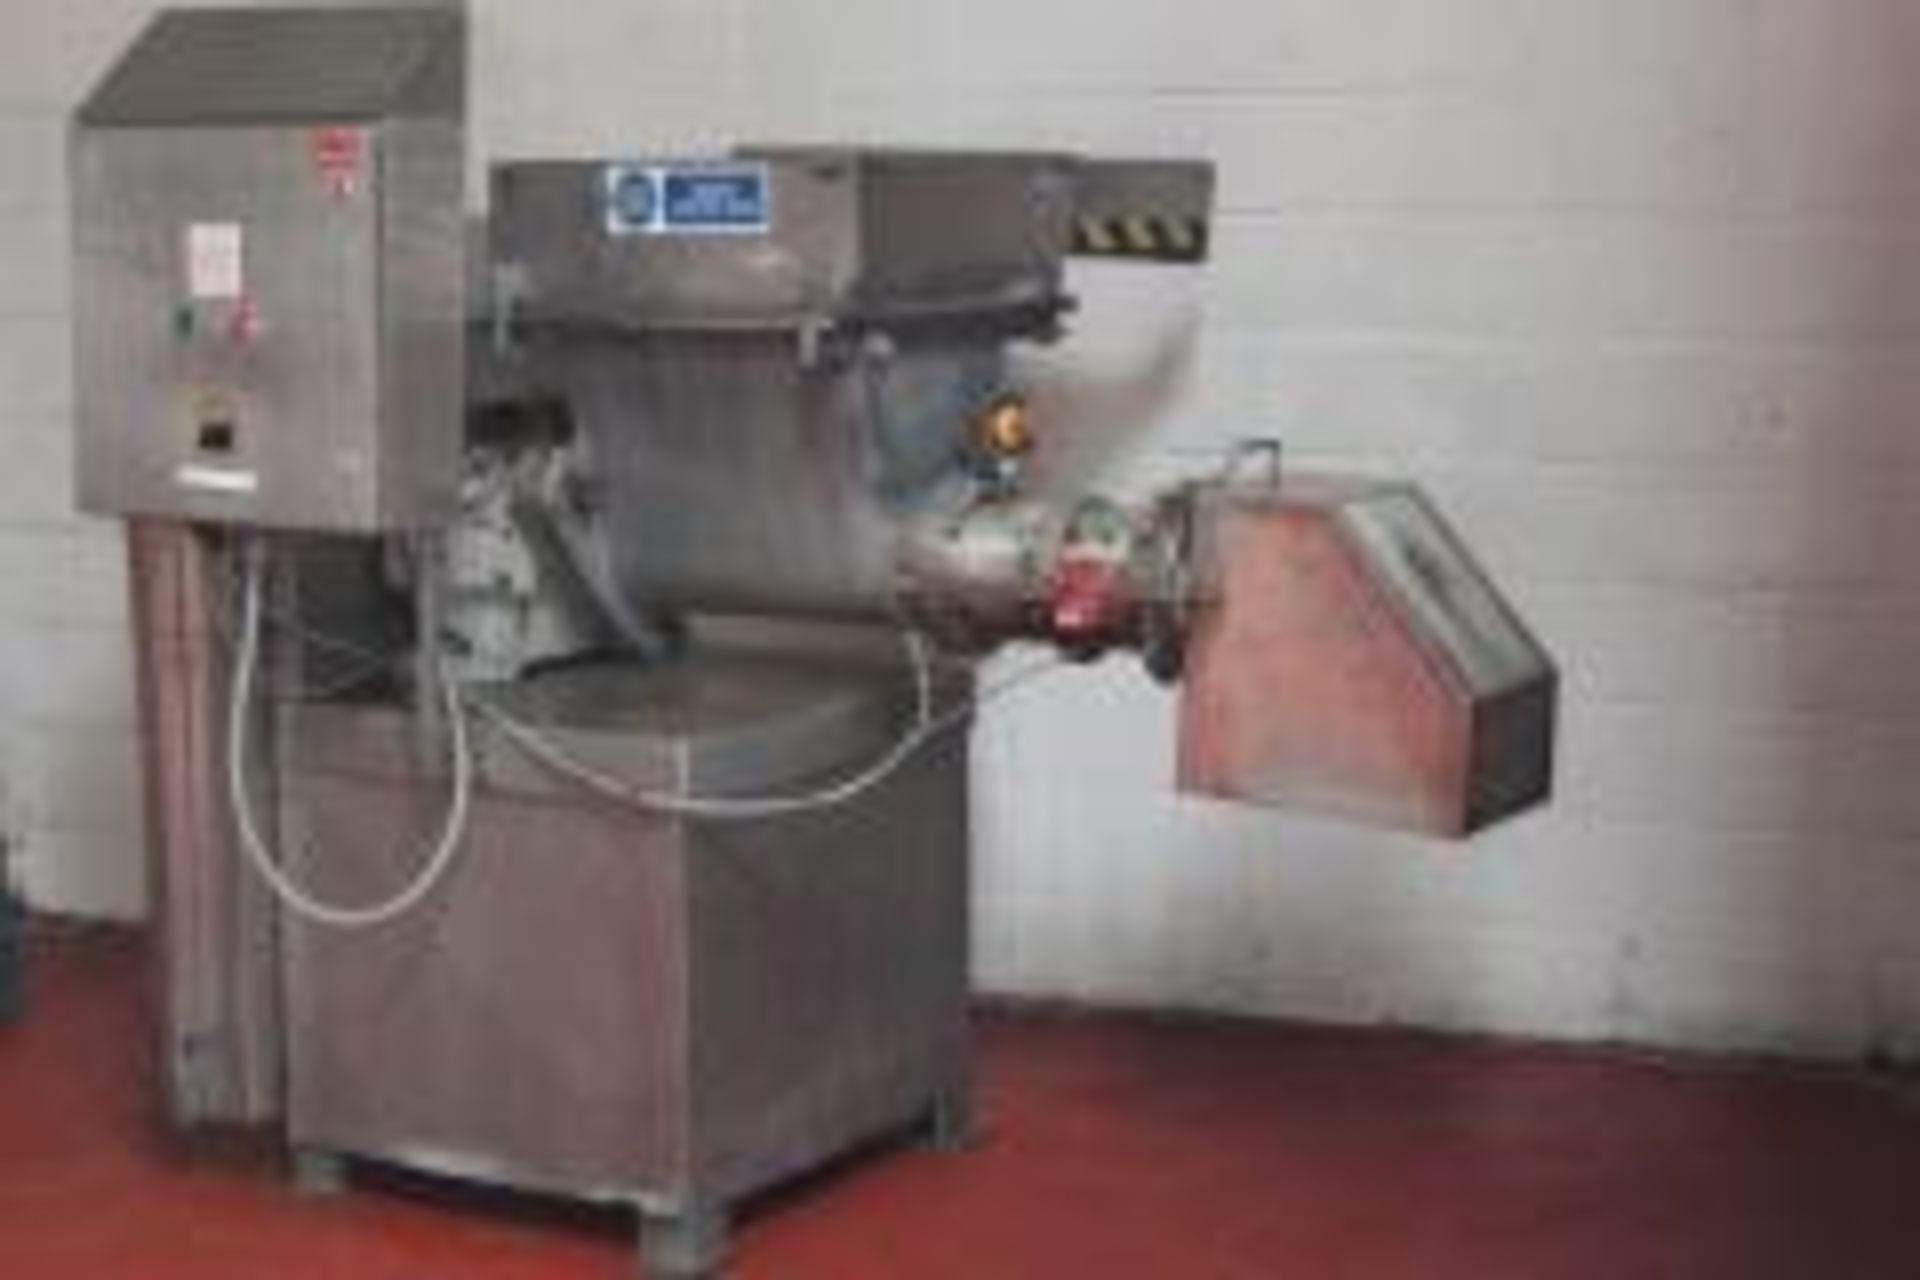 Weiller meat grinder, model 868, 50hp motor, fitted with a 10mm plate, ideal for all types of meat